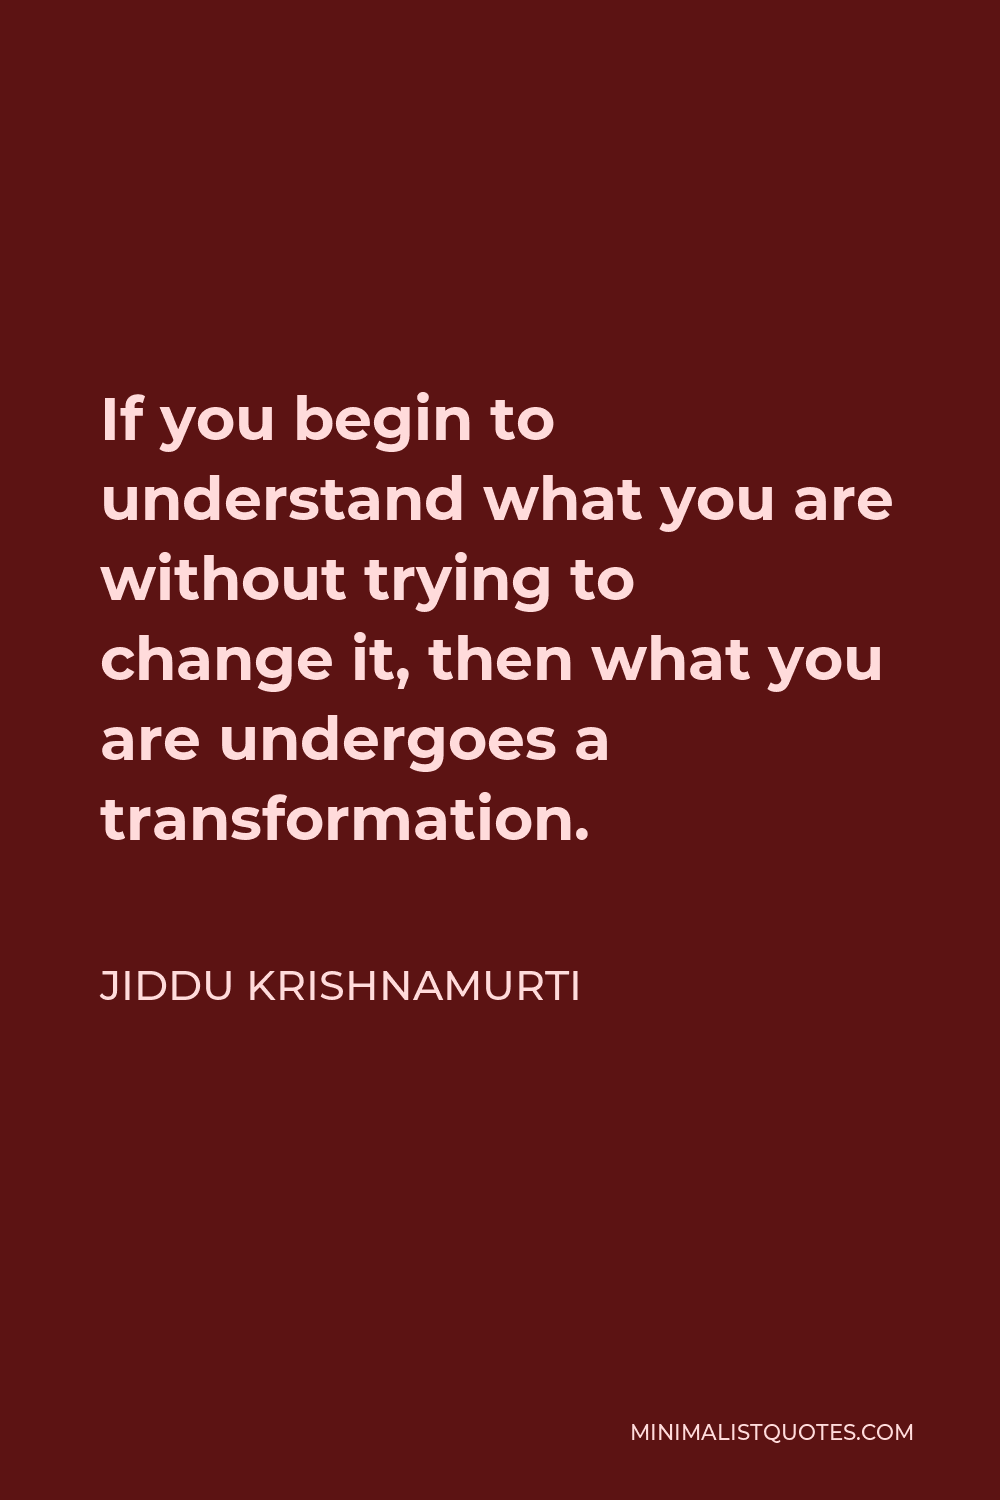 Jiddu Krishnamurti Quote - If you begin to understand what you are without trying to change it, then what you are undergoes a transformation.